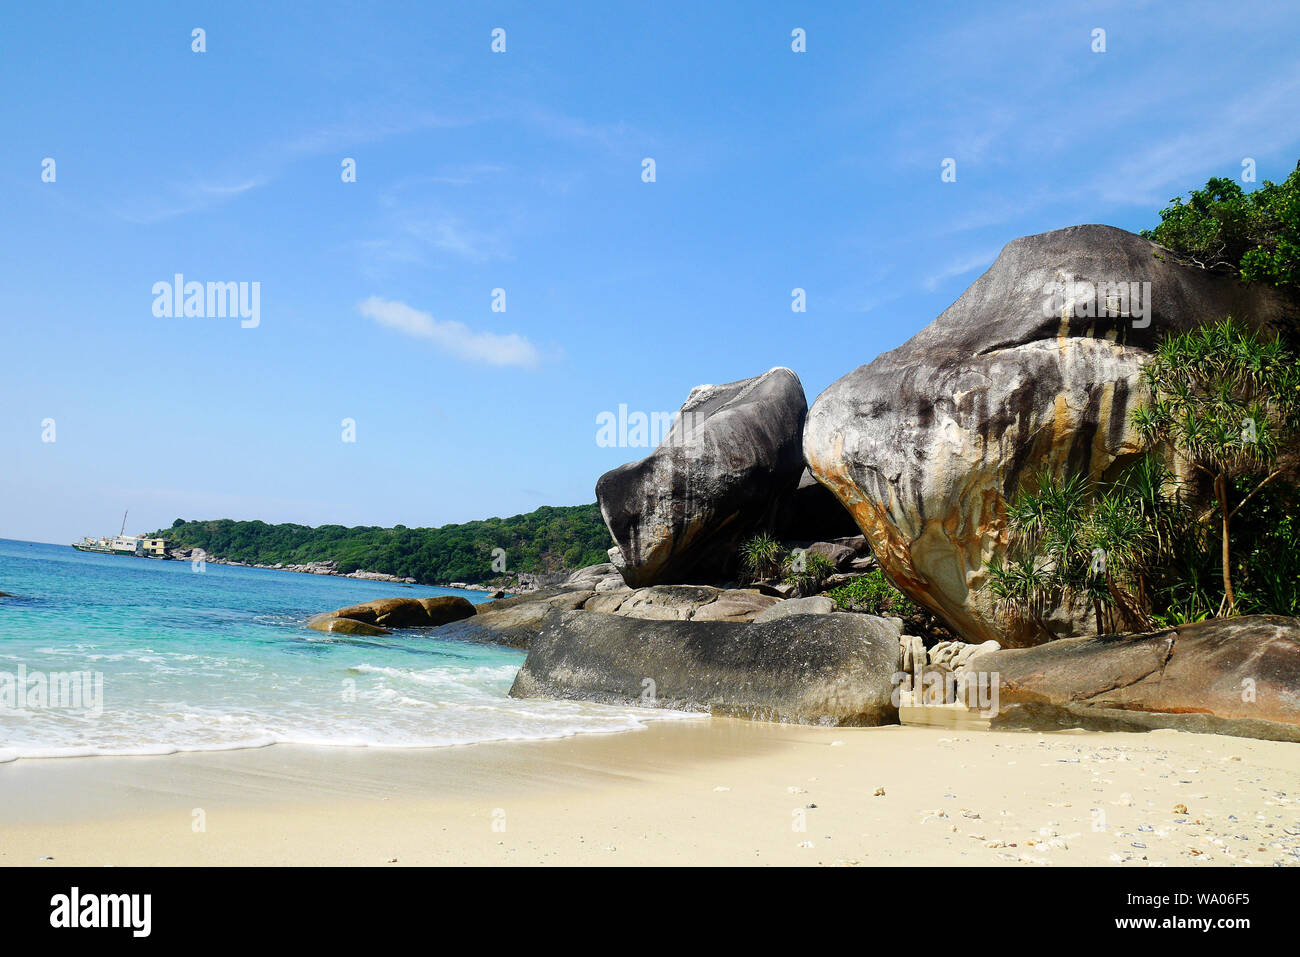 The topography of Boulder Island’s beaches is very reminiscent of the Seychelles  - Mergui Archipelago (Boulder Island, Island 115, Shark Island, Ba W Stock Photo